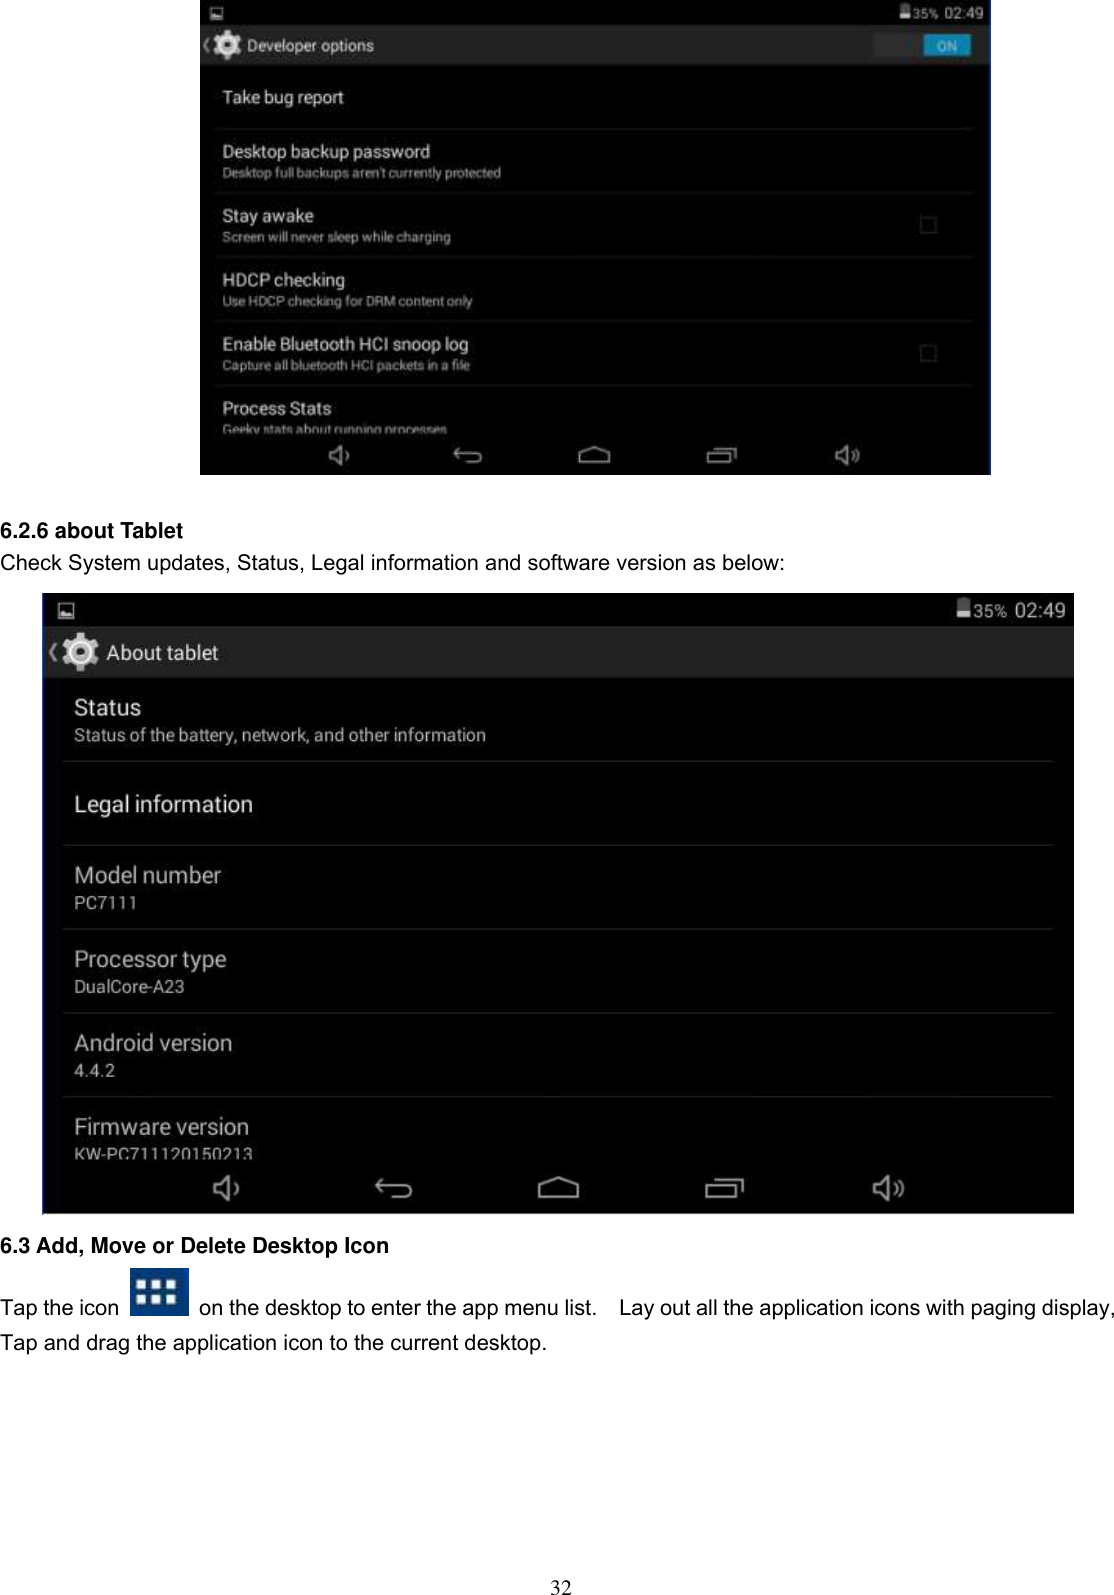  32          6.2.6 about Tablet Check System updates, Status, Legal information and software version as below:  6.3 Add, Move or Delete Desktop Icon Tap the icon    on the desktop to enter the app menu list.    Lay out all the application icons with paging display, Tap and drag the application icon to the current desktop.    